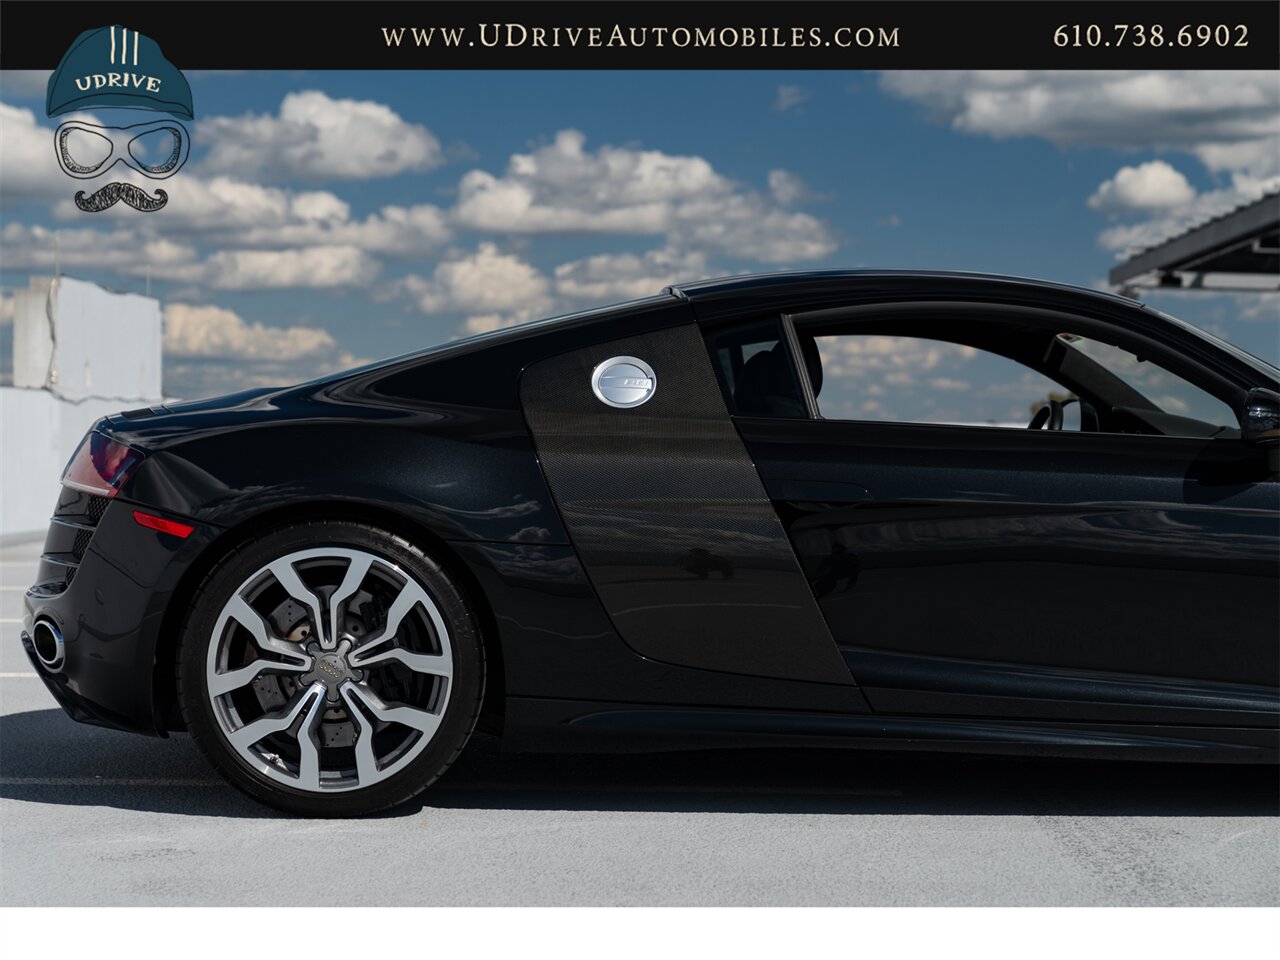 2011 Audi R8 5.2 Quattro  V10 6 Speed Manual - Photo 18 - West Chester, PA 19382